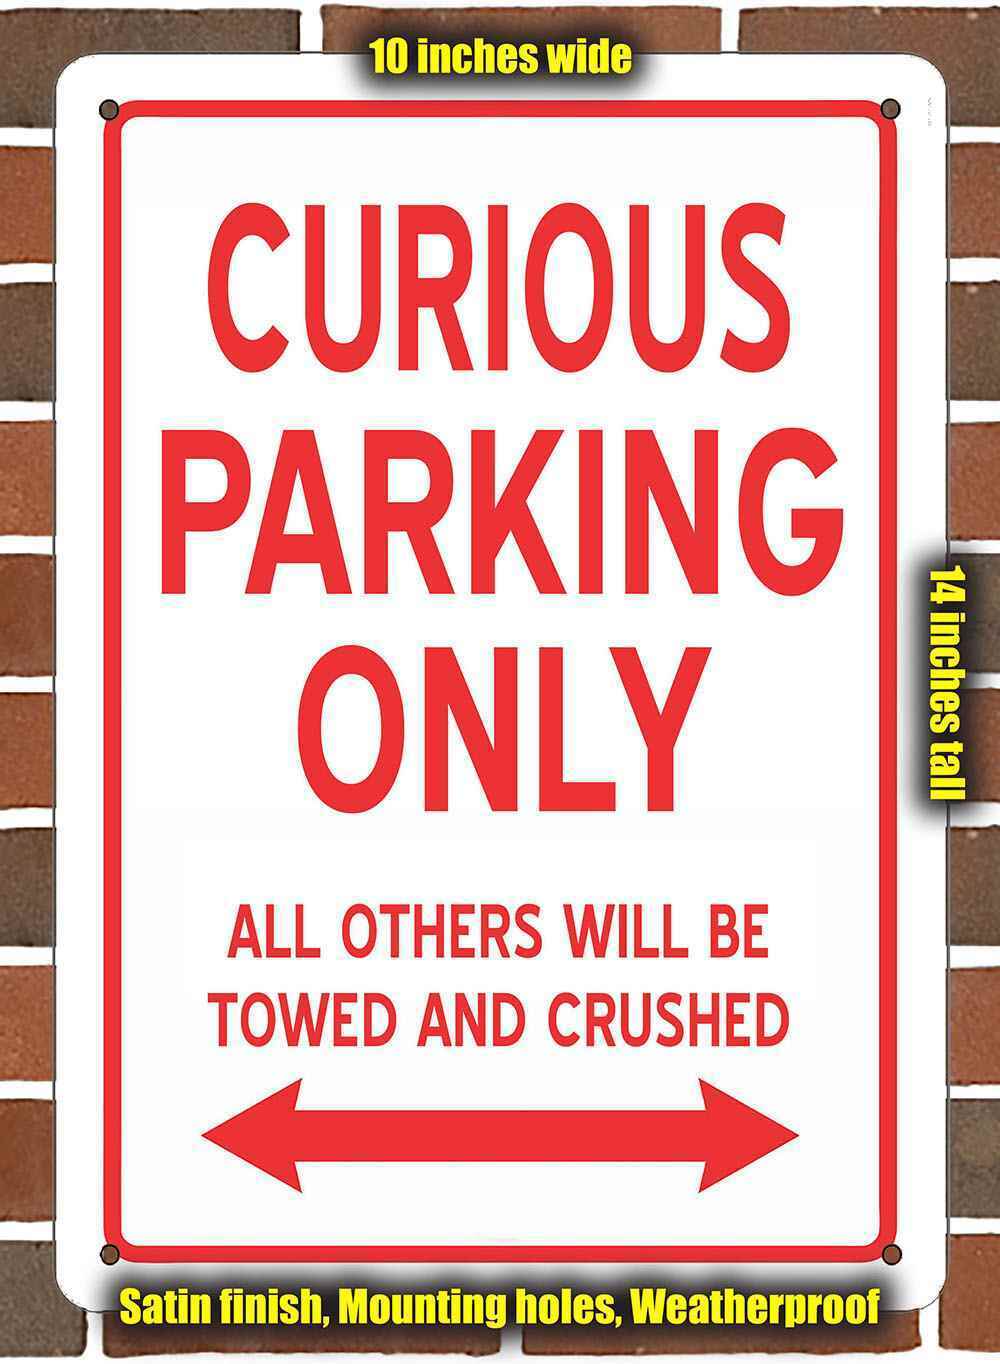 Metal Sign - CURIOUS PARKING ONLY- 10x14 inches